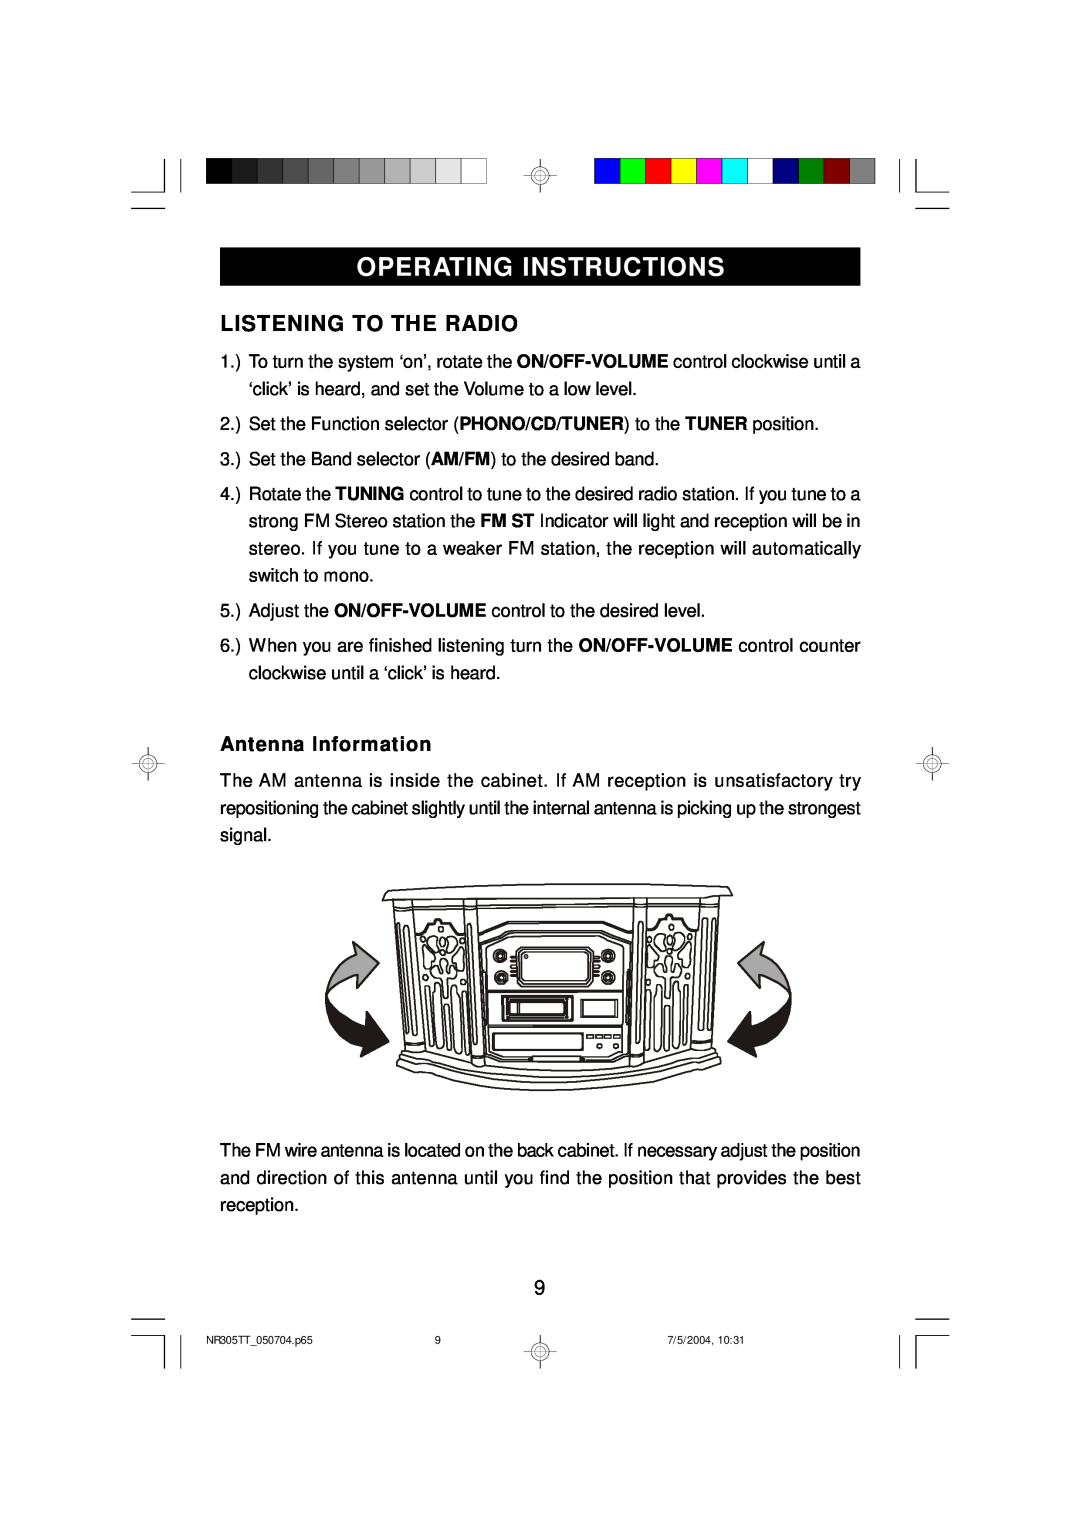 Emerson NR305TT owner manual Operating Instructions, Listening To The Radio, Antenna Information 